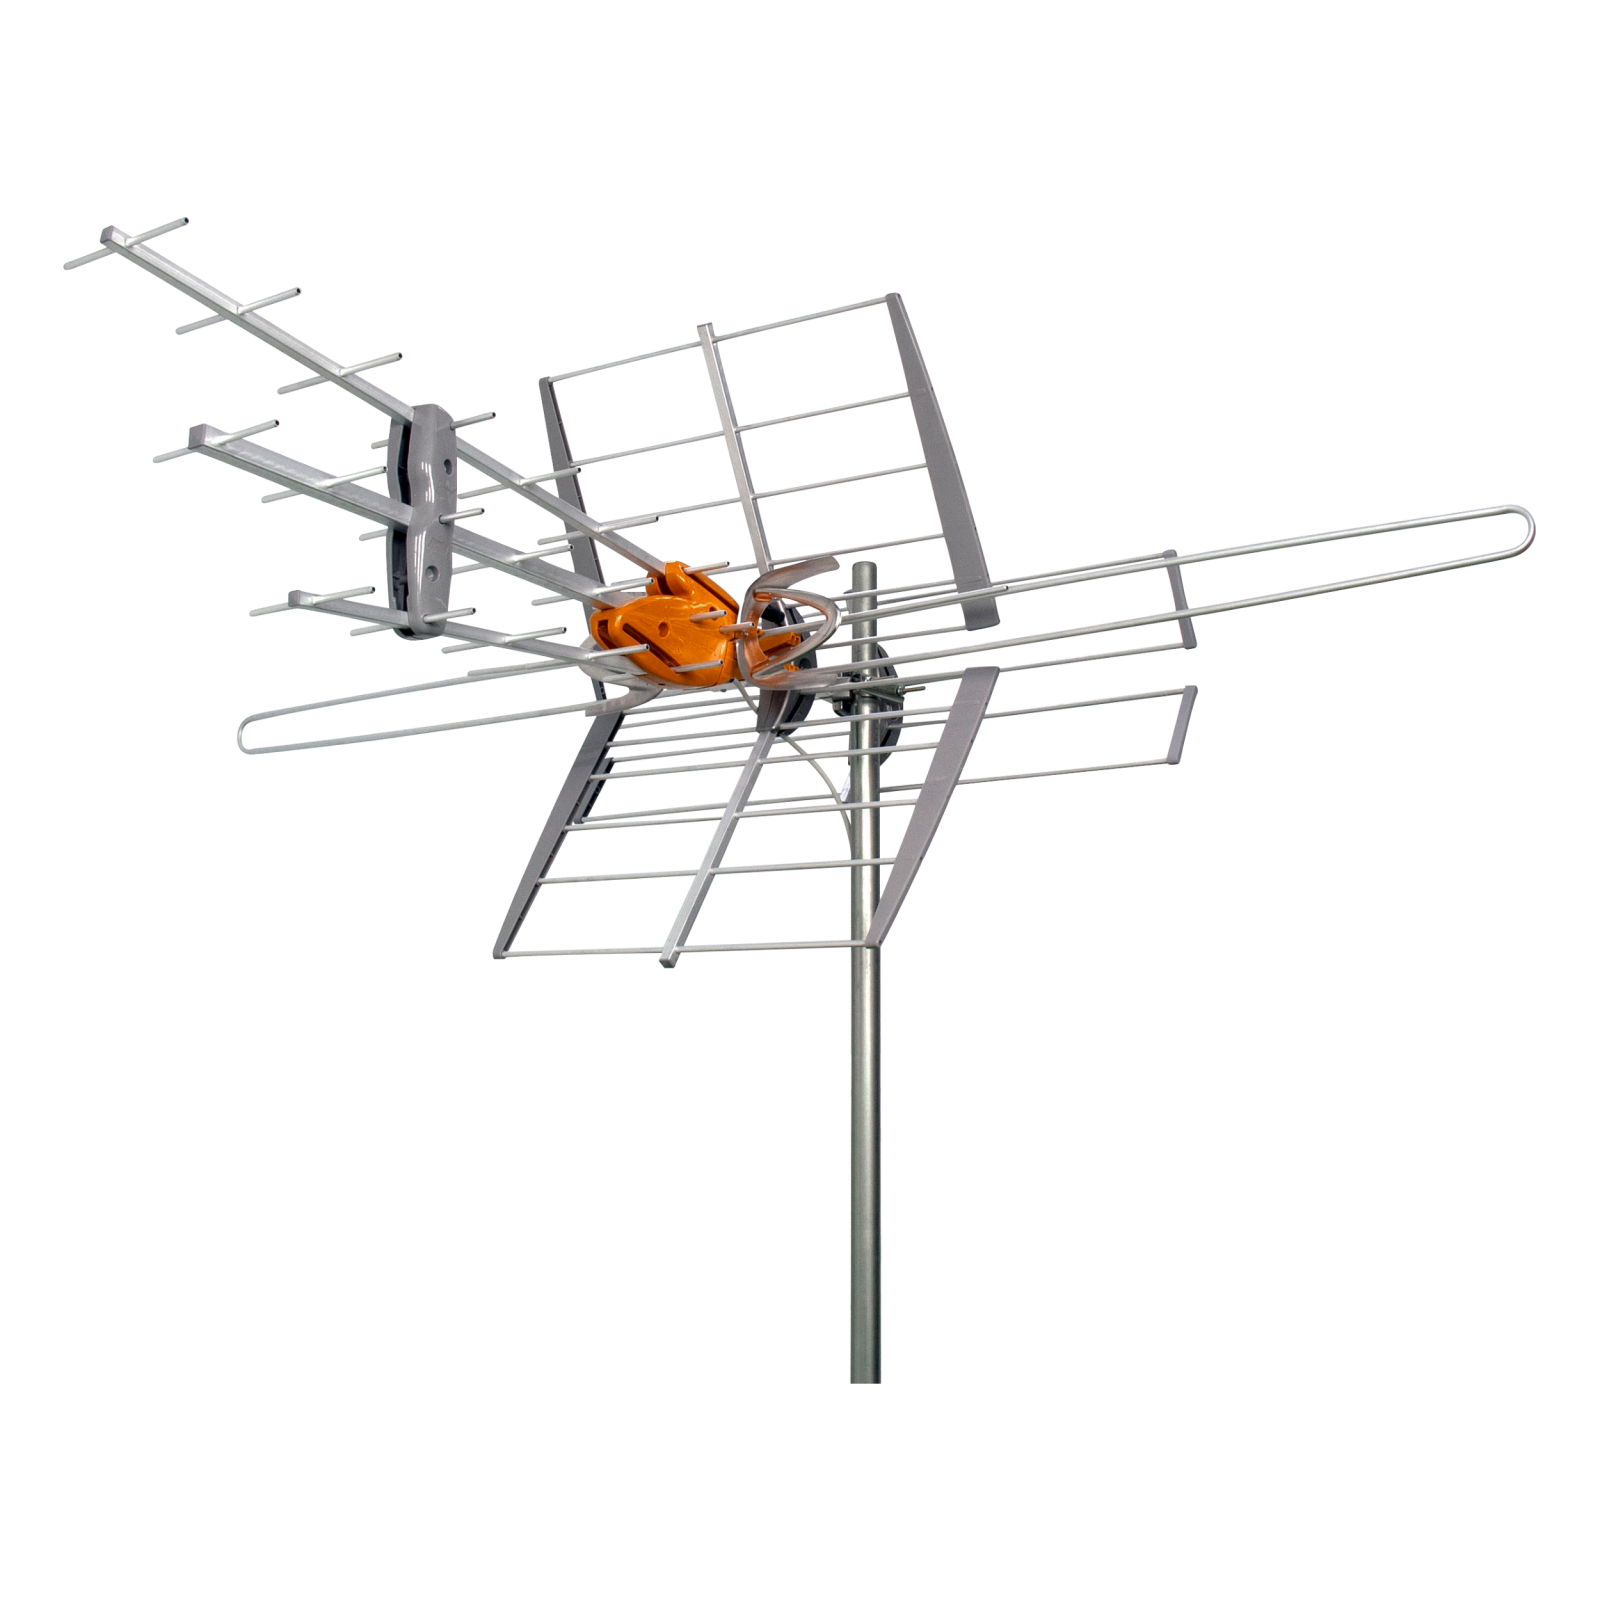 Televes, Televes 148281, DAT BOSS MIX TV Antenna with W/Preamp, LO-VHF/HI-VHF/UHF